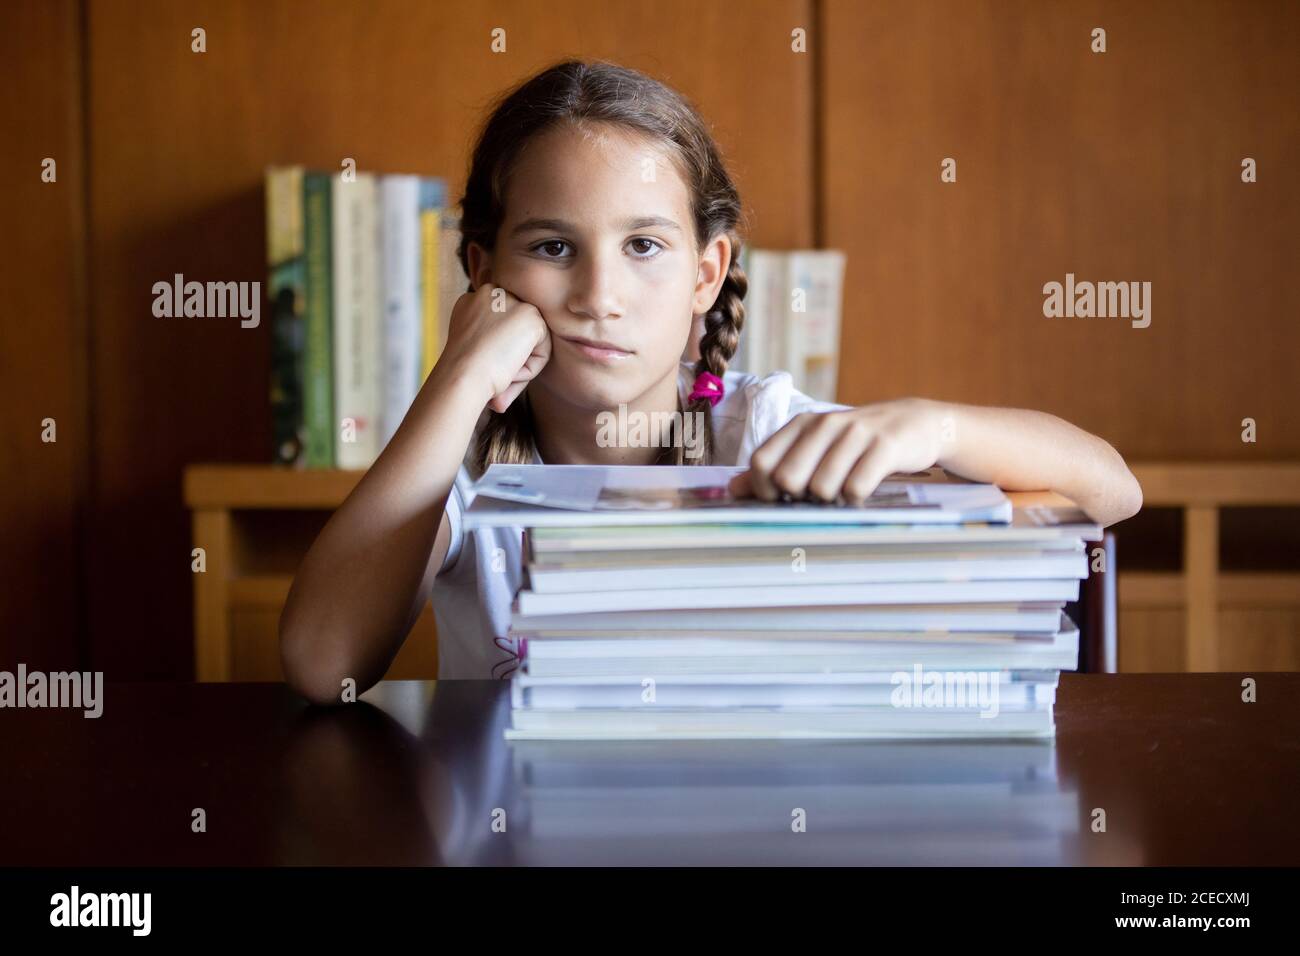 Young student fed up with studying looking towards the camera with her head resting on her hand Stock Photo